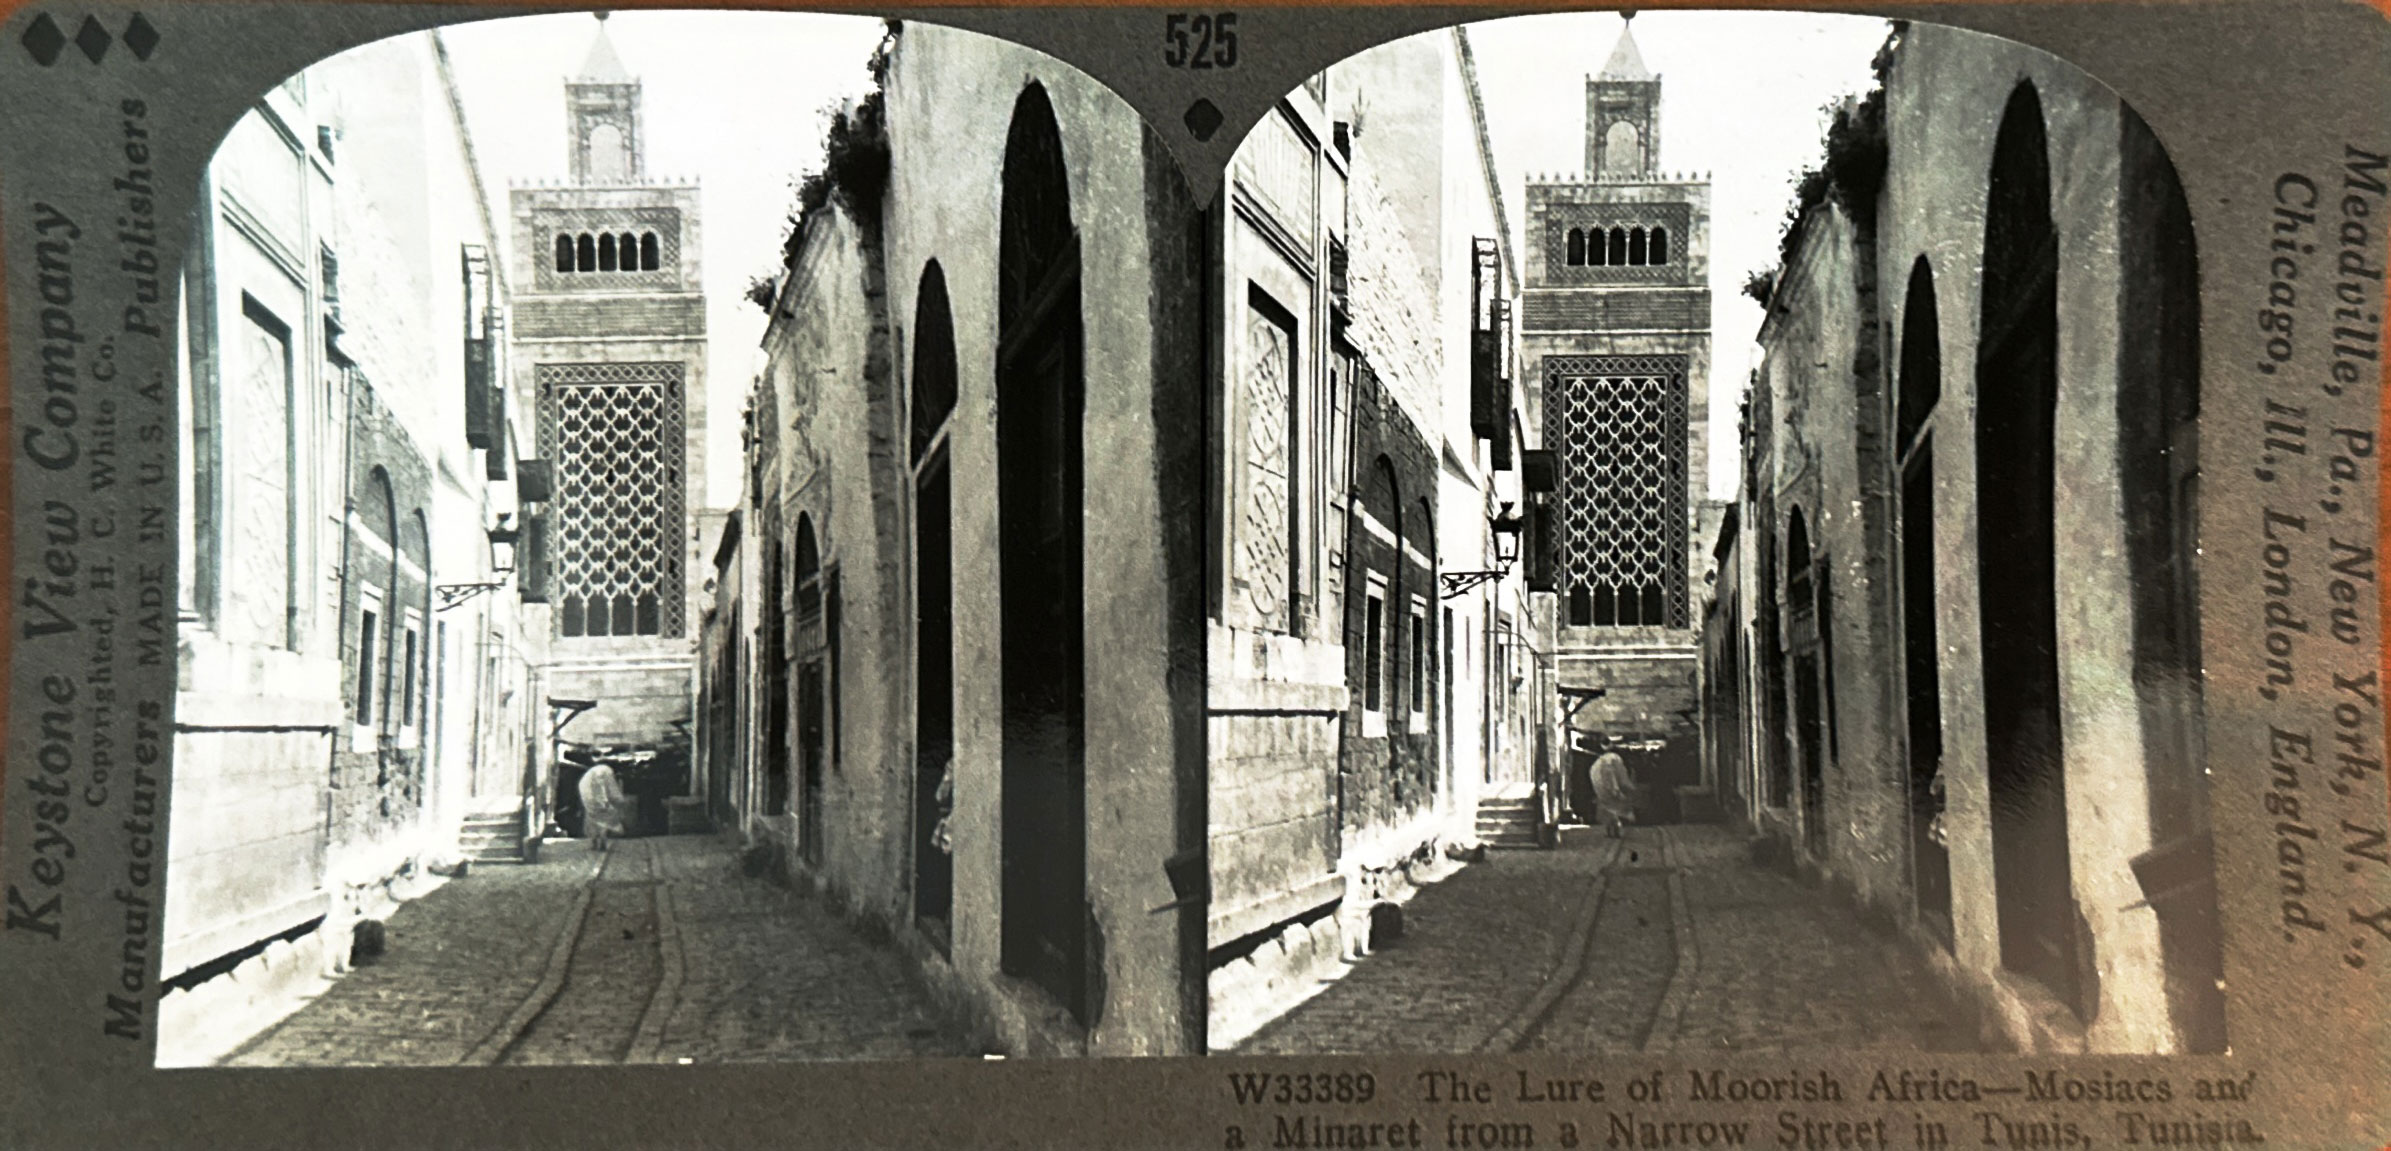 Zaytuna Mosque - <p>"The Lure of Moorish Africa. Mosaics and a minaret from a narrow street in Tunis, Tunisia" (sic)</p>